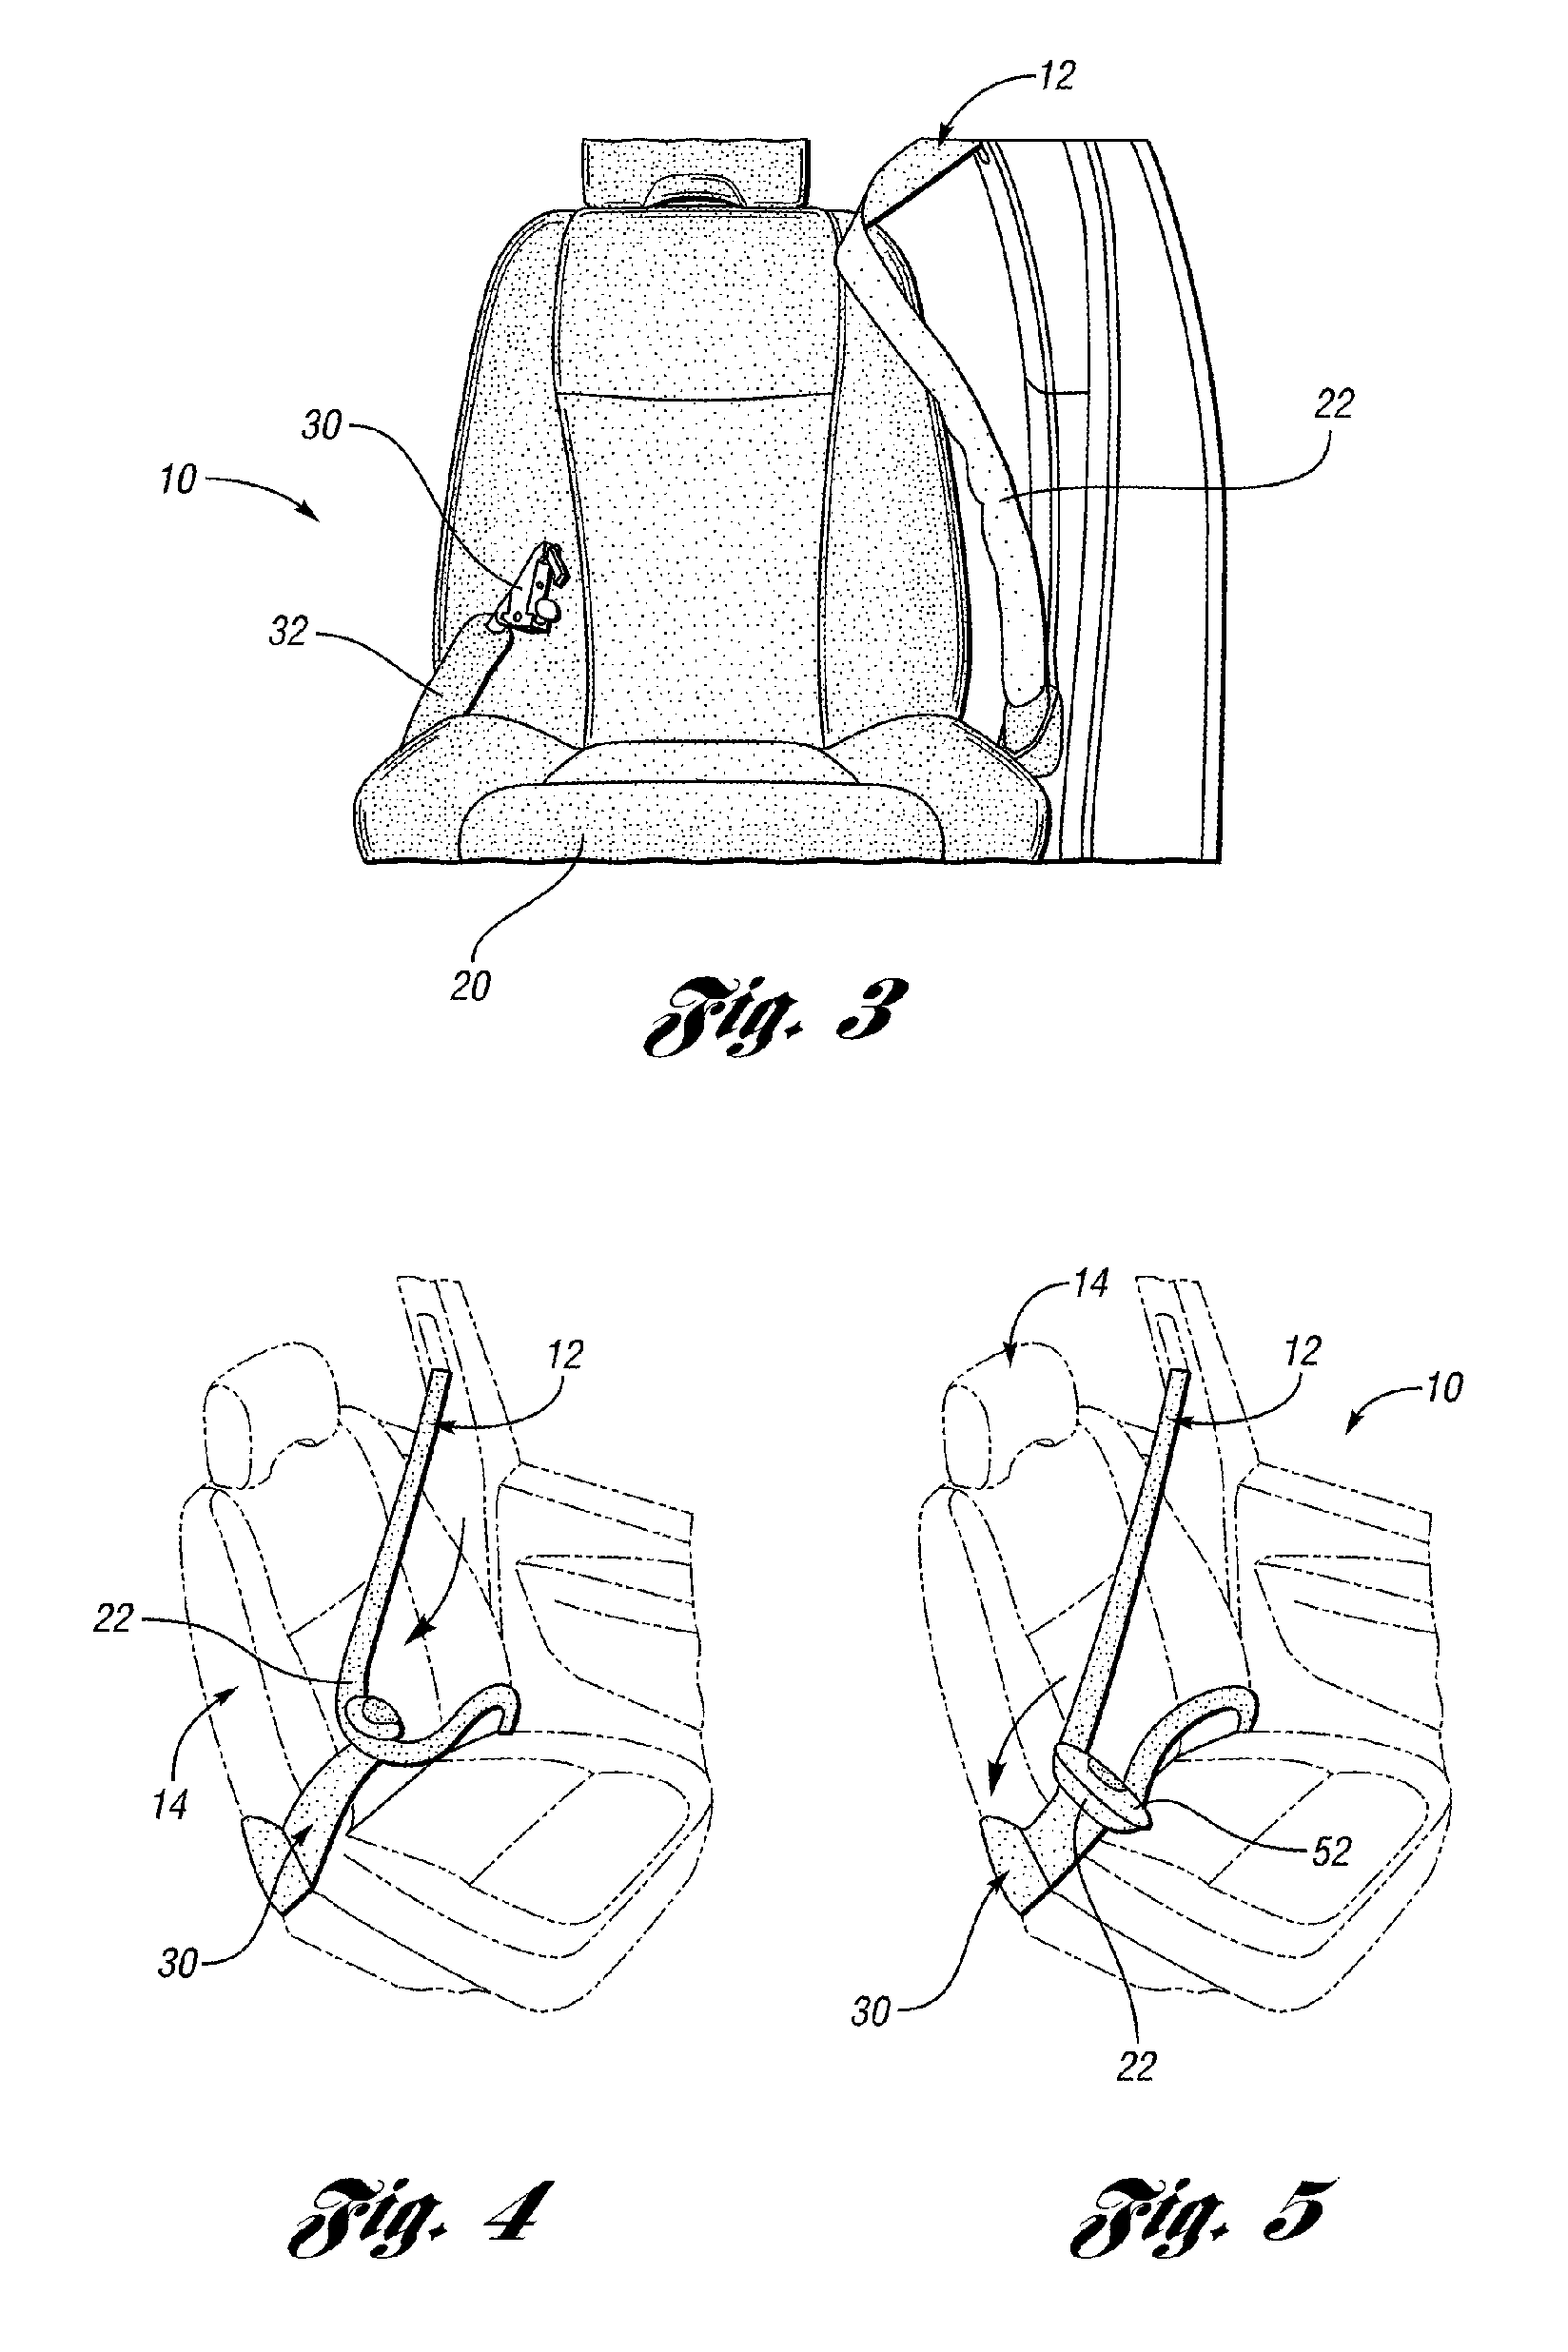 Restraint system for a vehicle